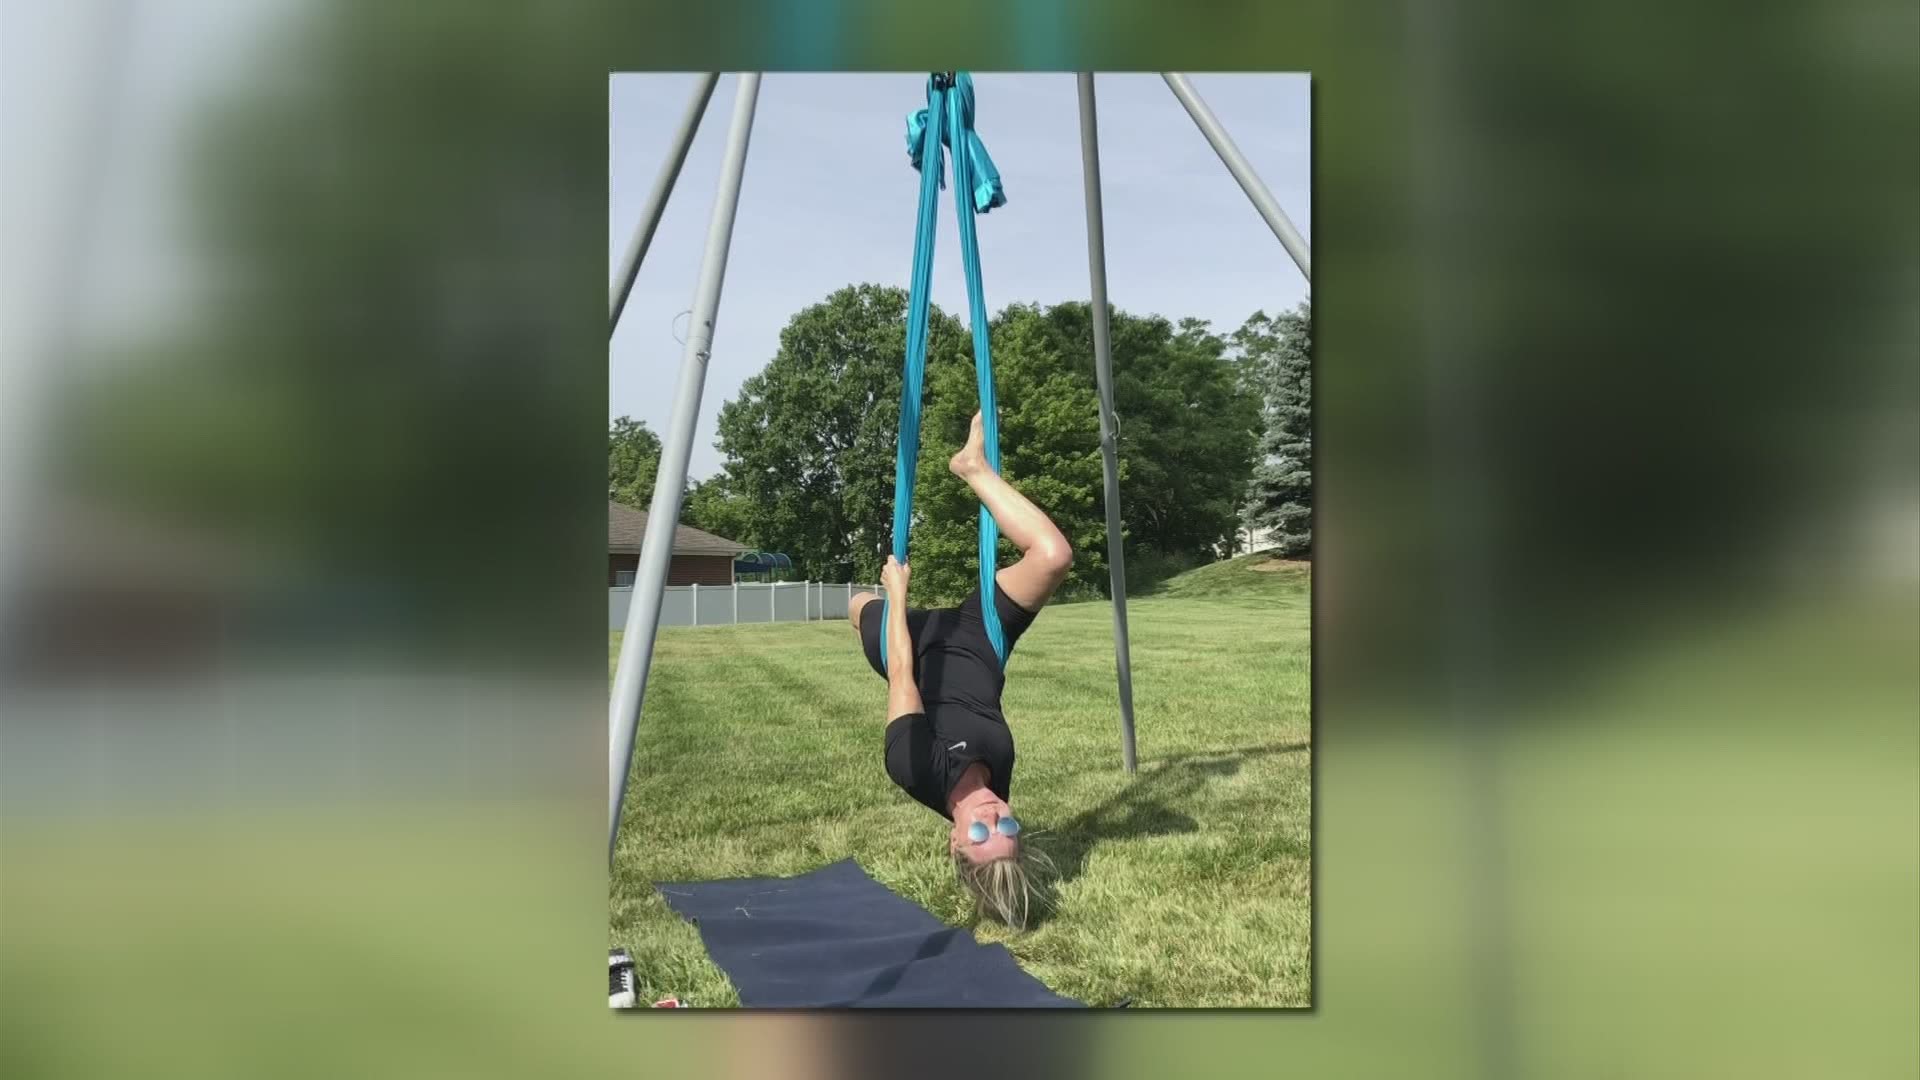 A yoga studio is bringing aerial exercise to the outdoors.